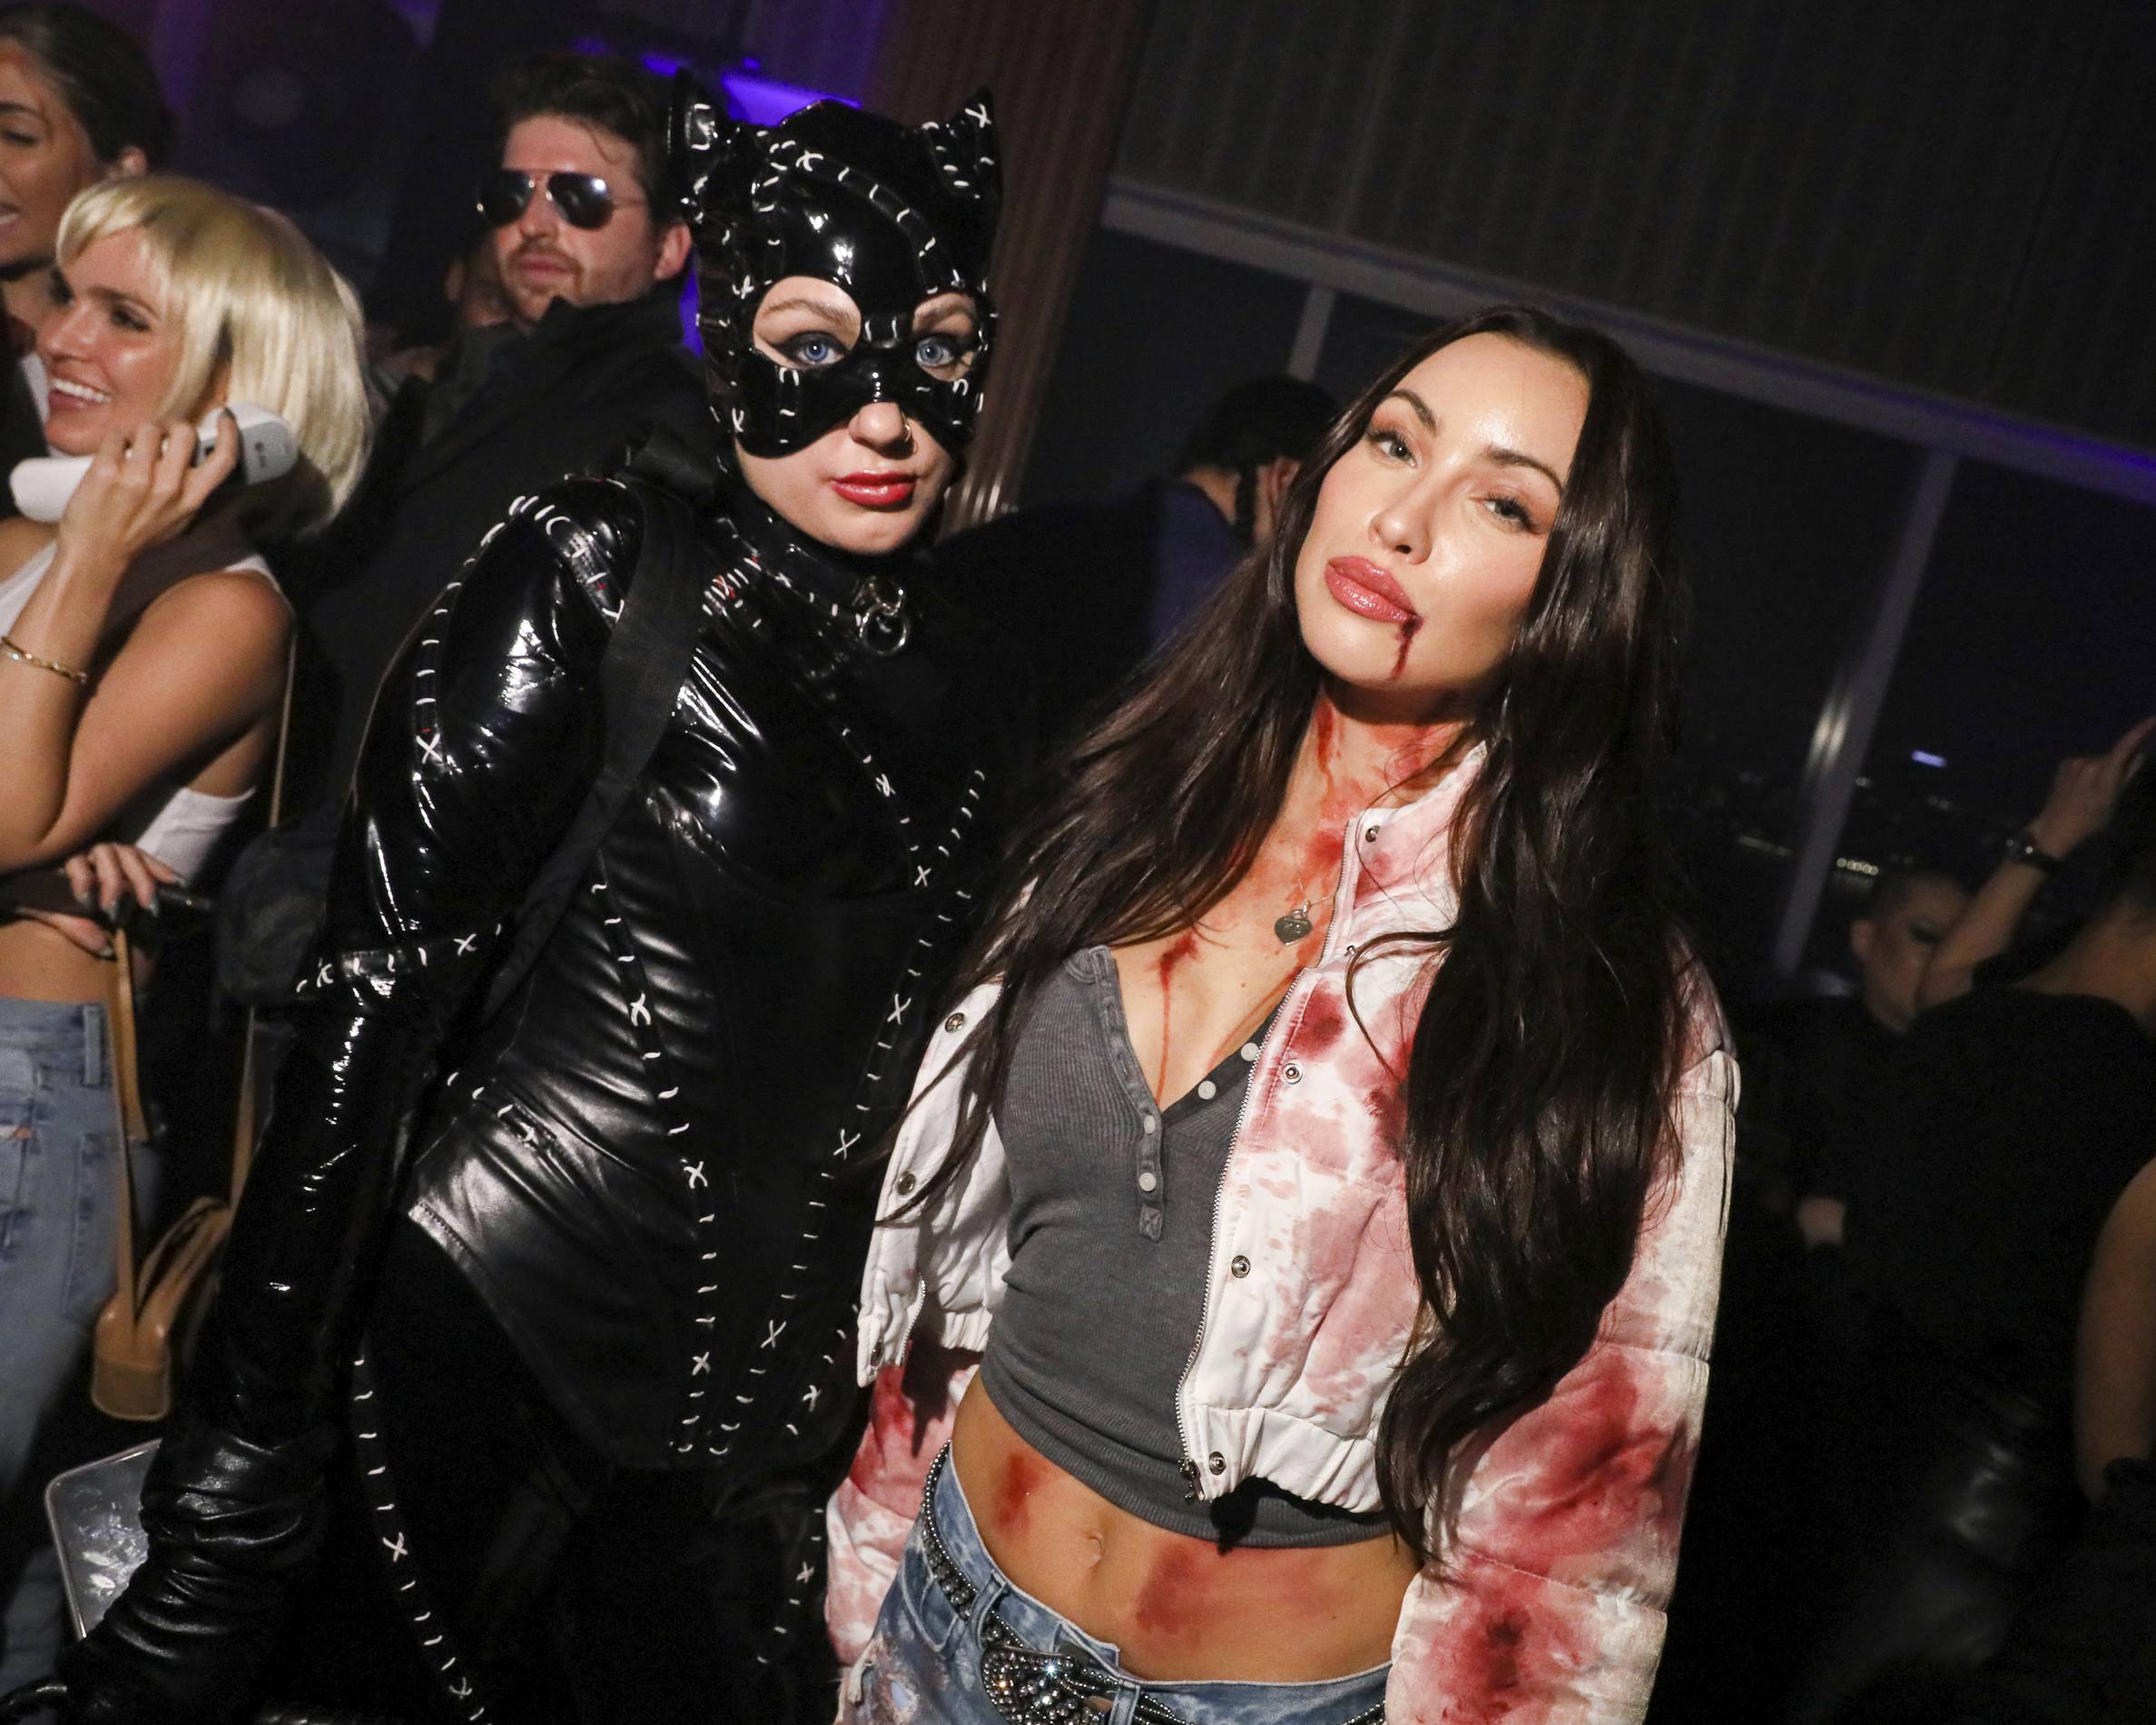 Kelly Shami and Danielle Guizio at the Standard Halloween party 2021